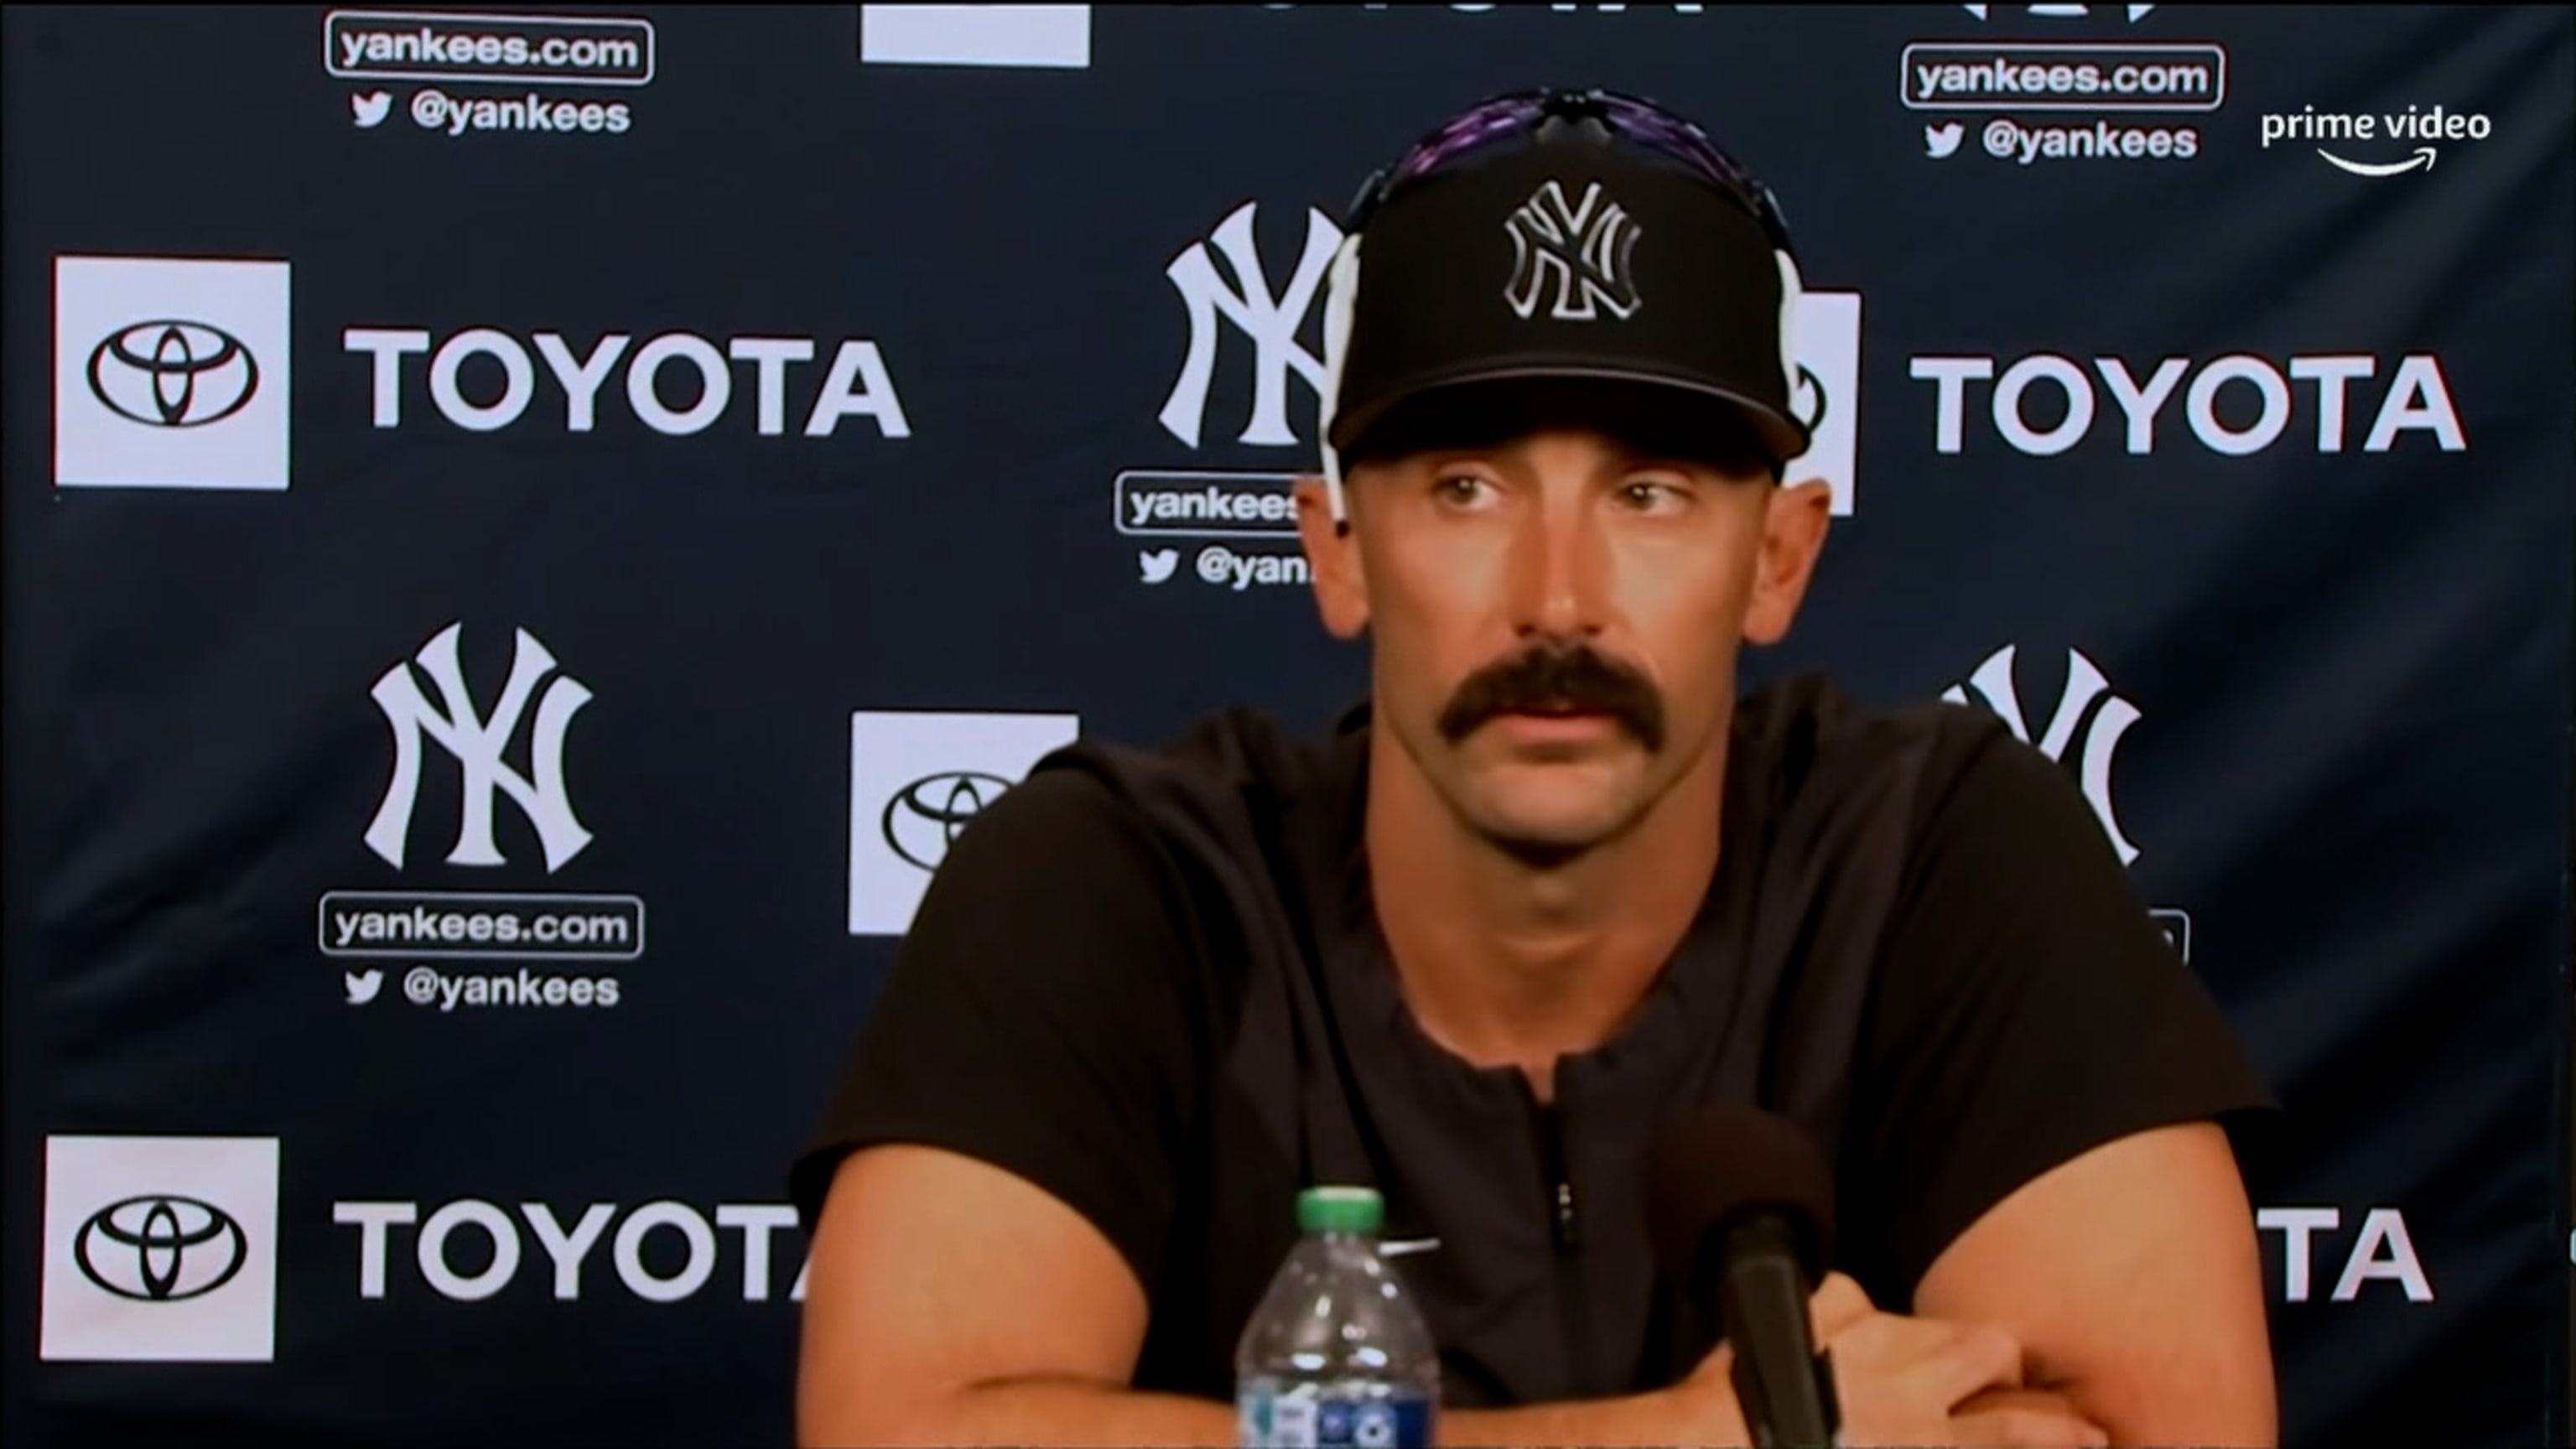 Matt Carpenter to the rescue of the Yankees, the third baseman joins the  Bronx Bombers